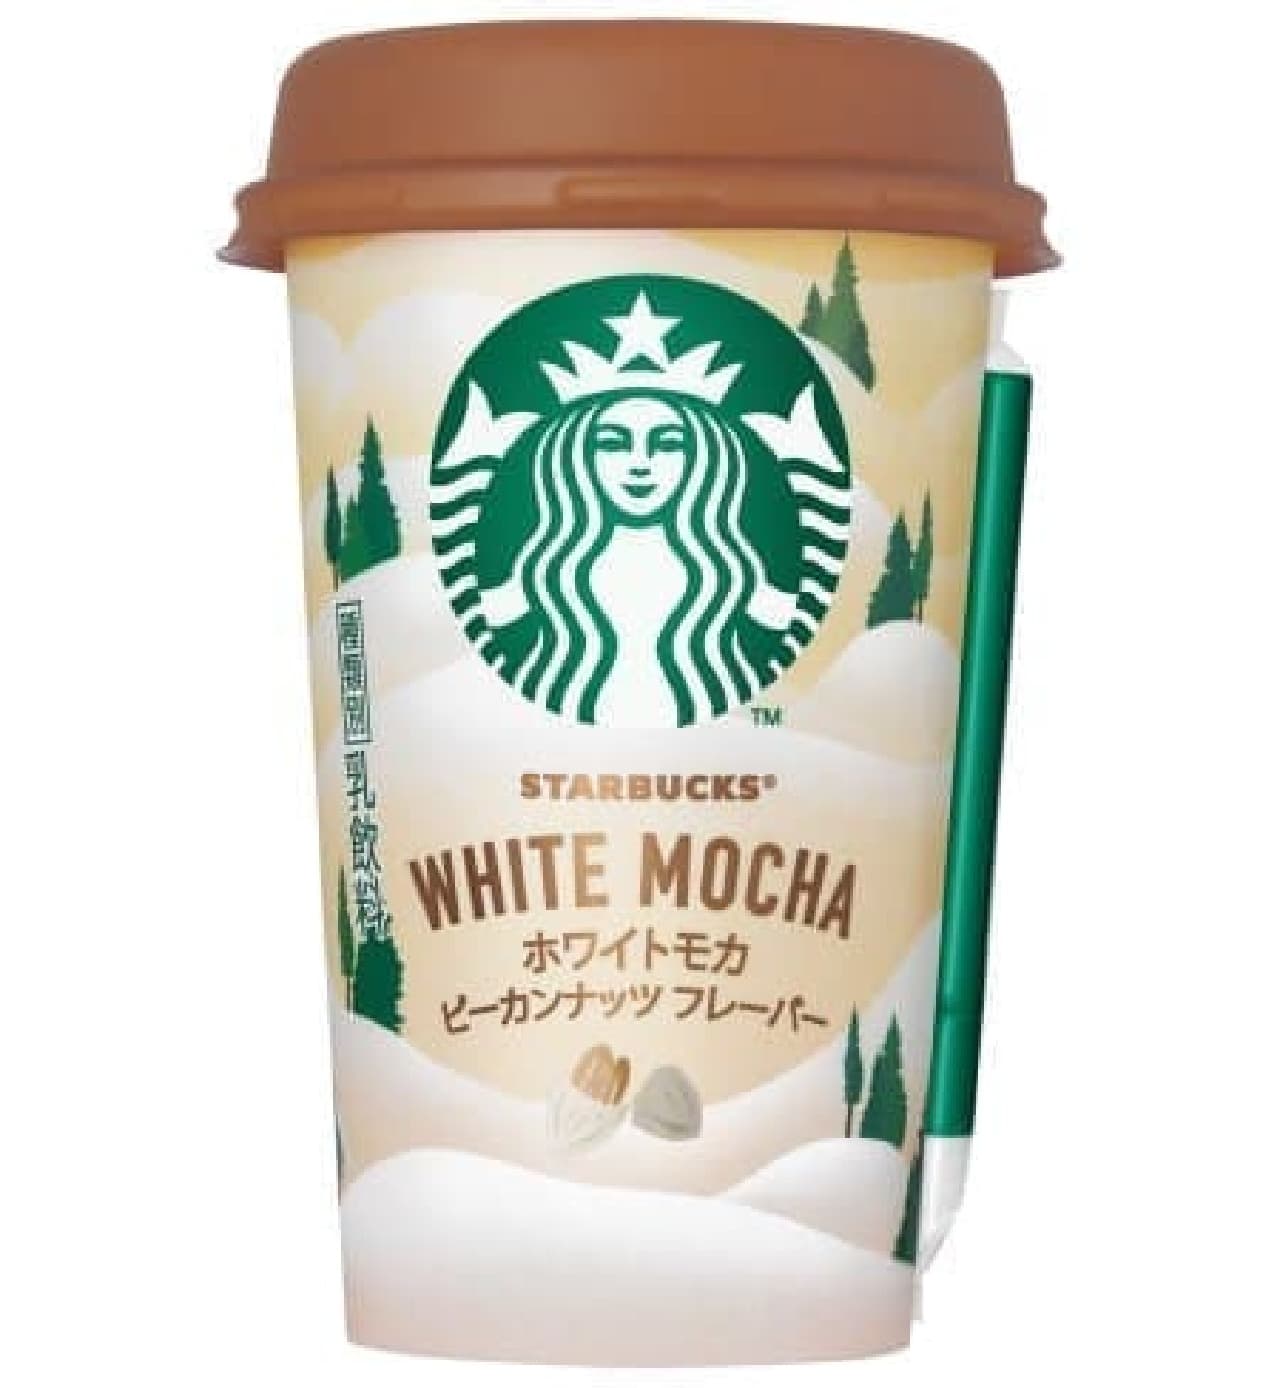 "White Mocha Pecan Nut Flavor" for Starbucks that you can buy at convenience stores